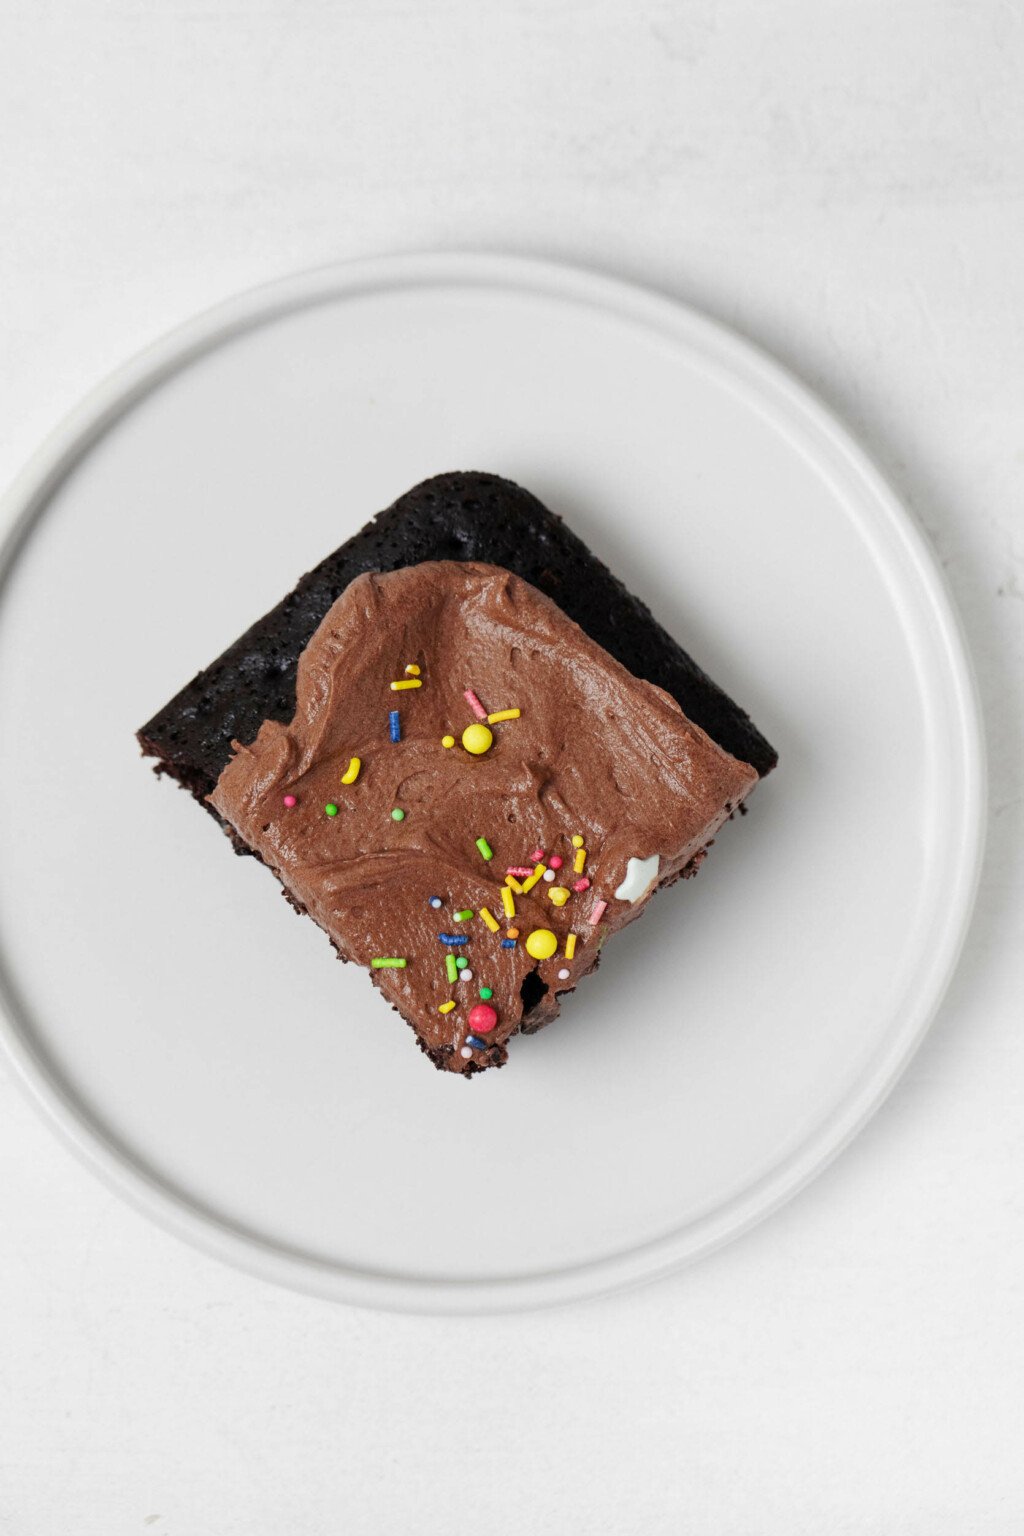 A square slice of chocolate snack cake served on a round, white plate.